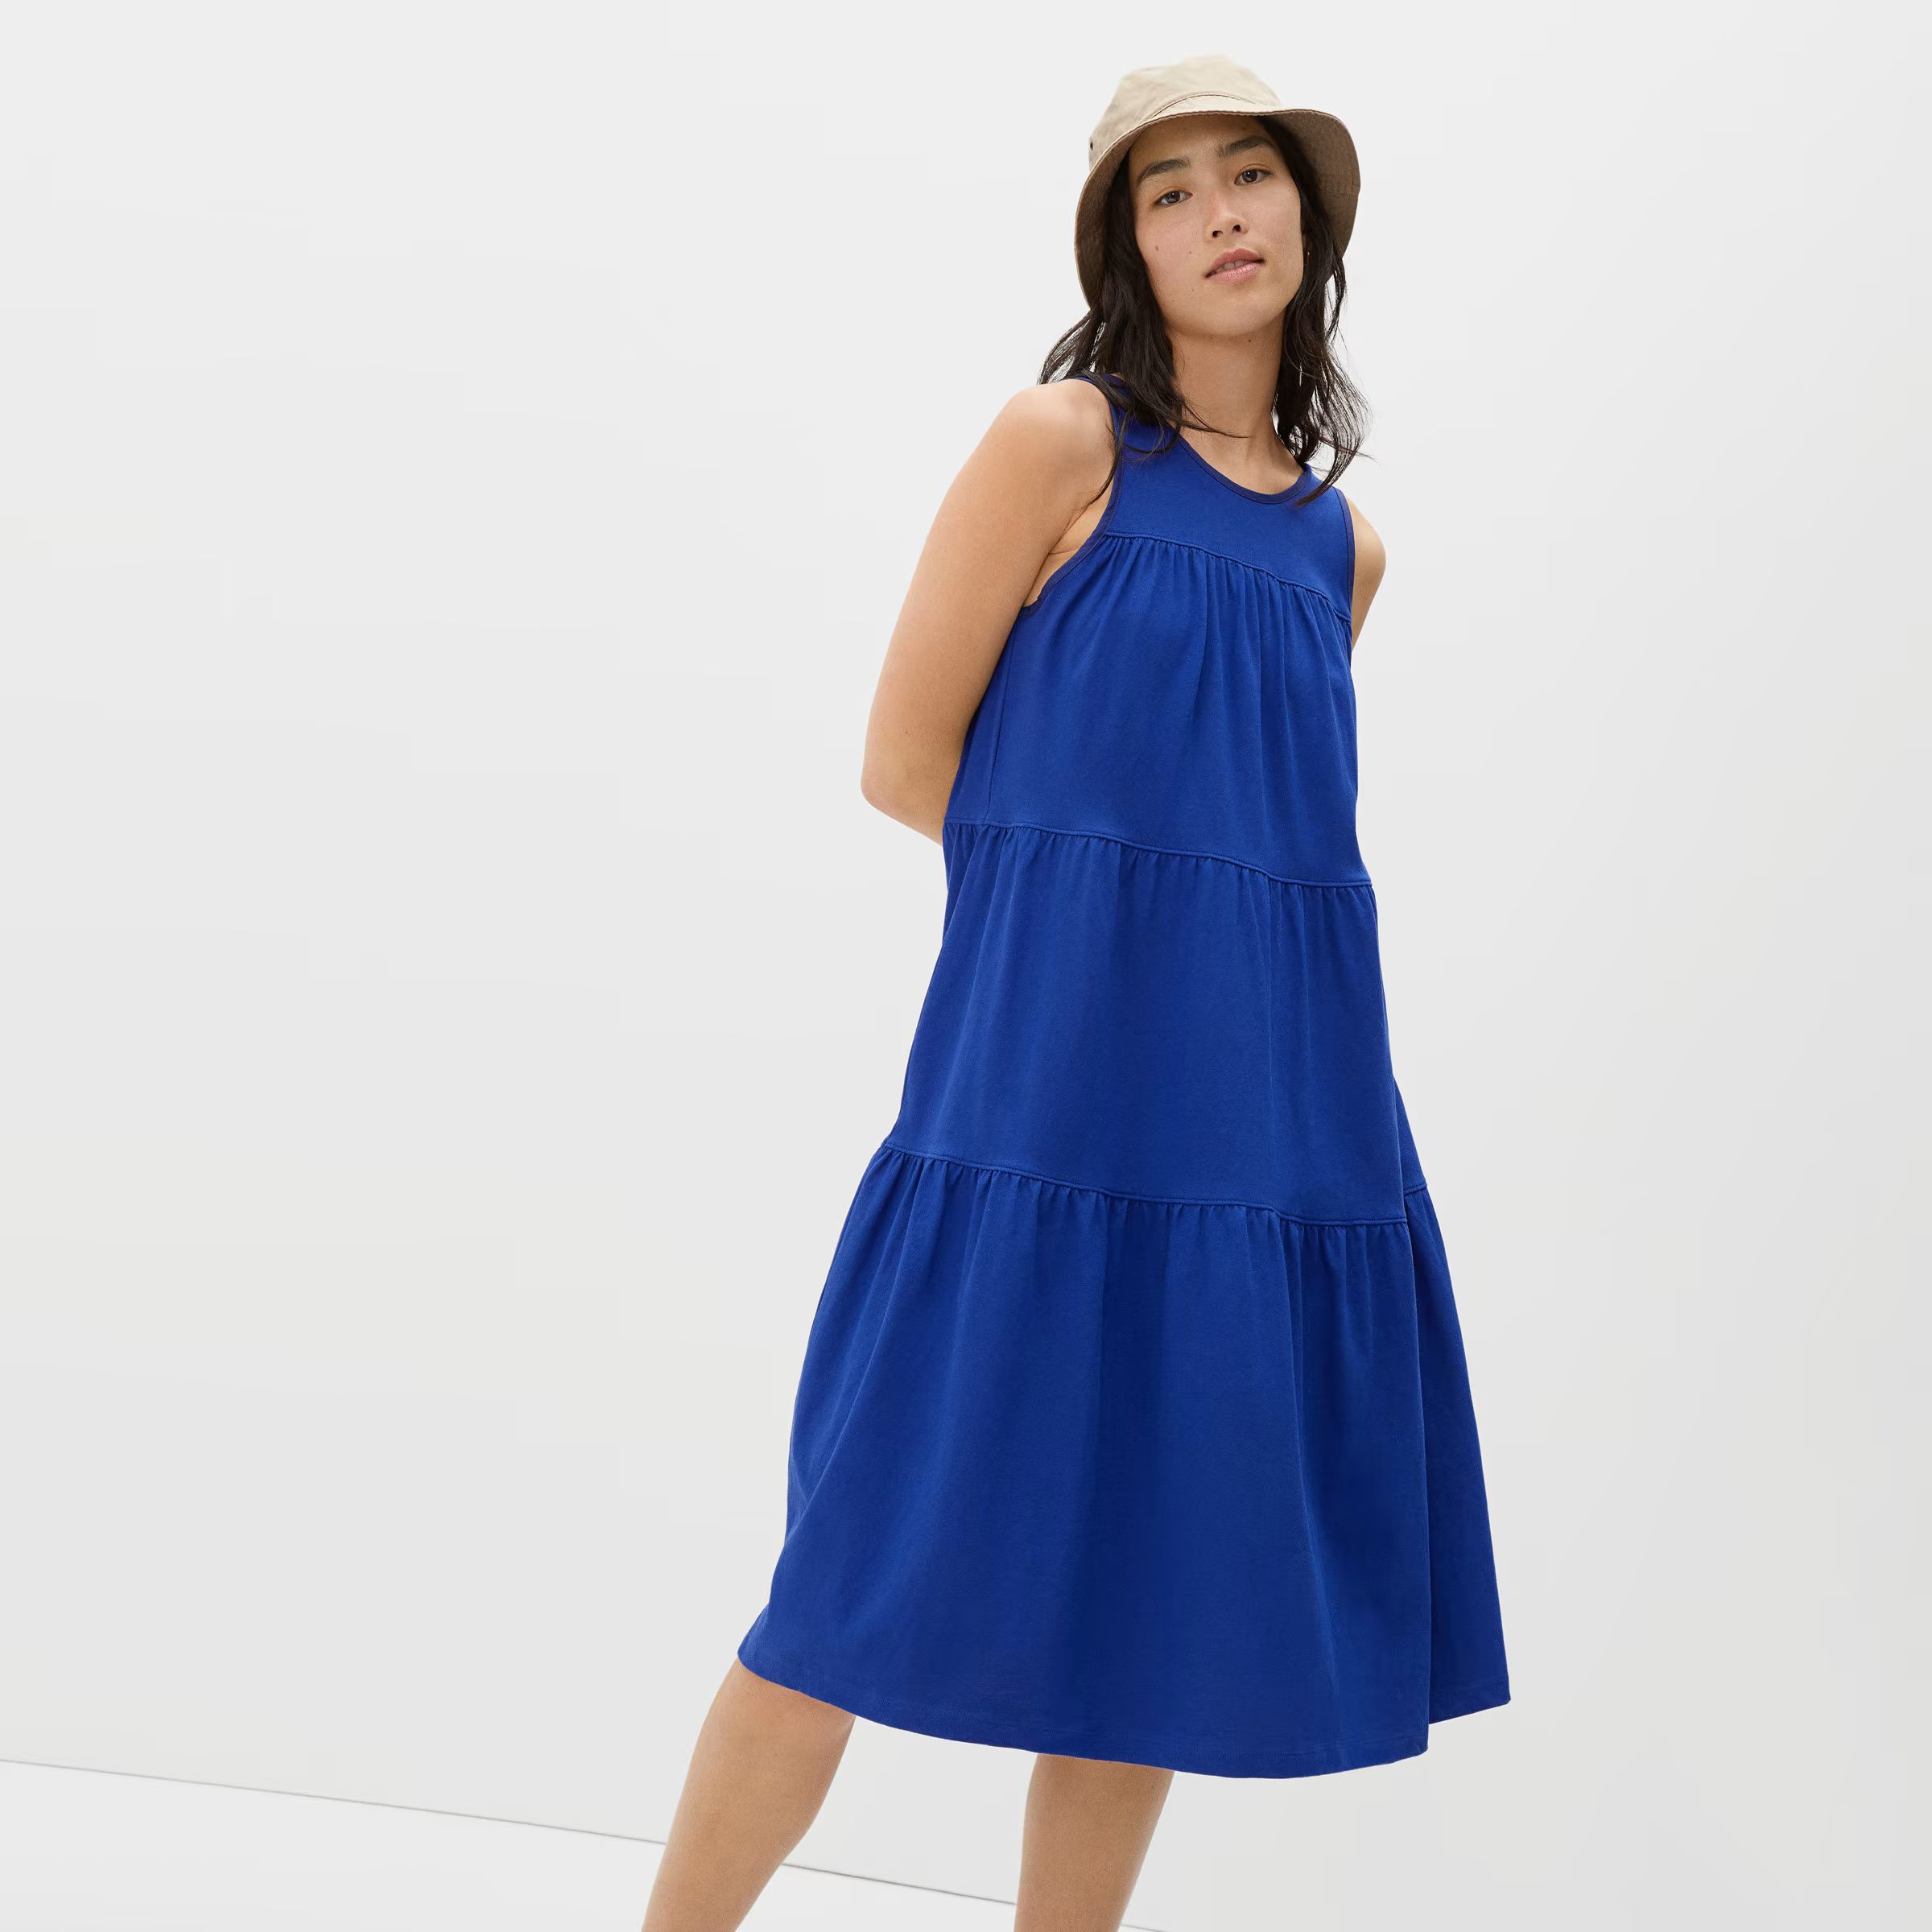 The Weekend Tiered Dress | Everlane